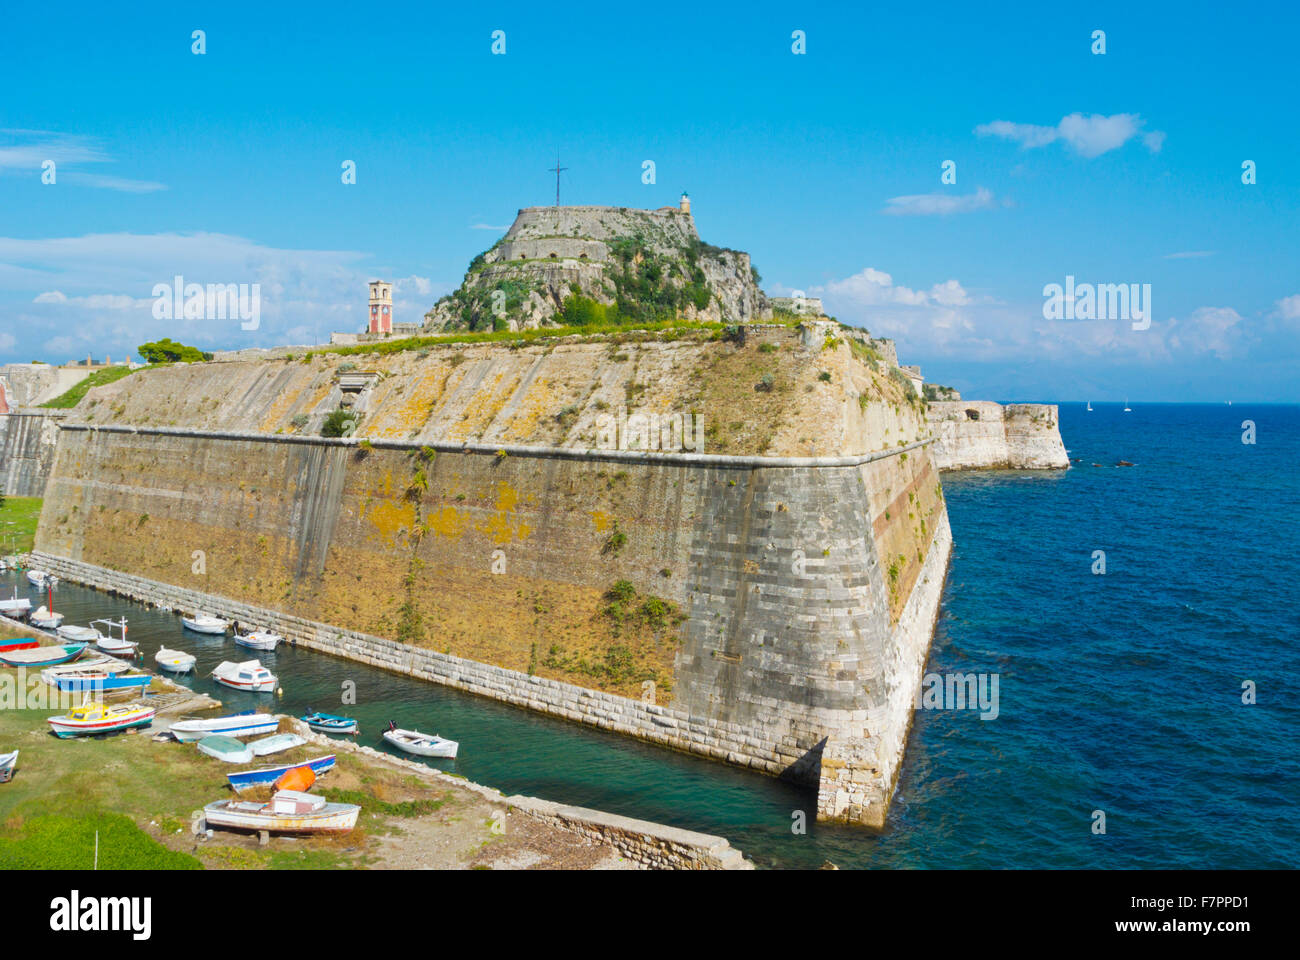 Contrafossa, canal in front of Old Fortress, Corfu town, Ionian islands, Greece Stock Photo